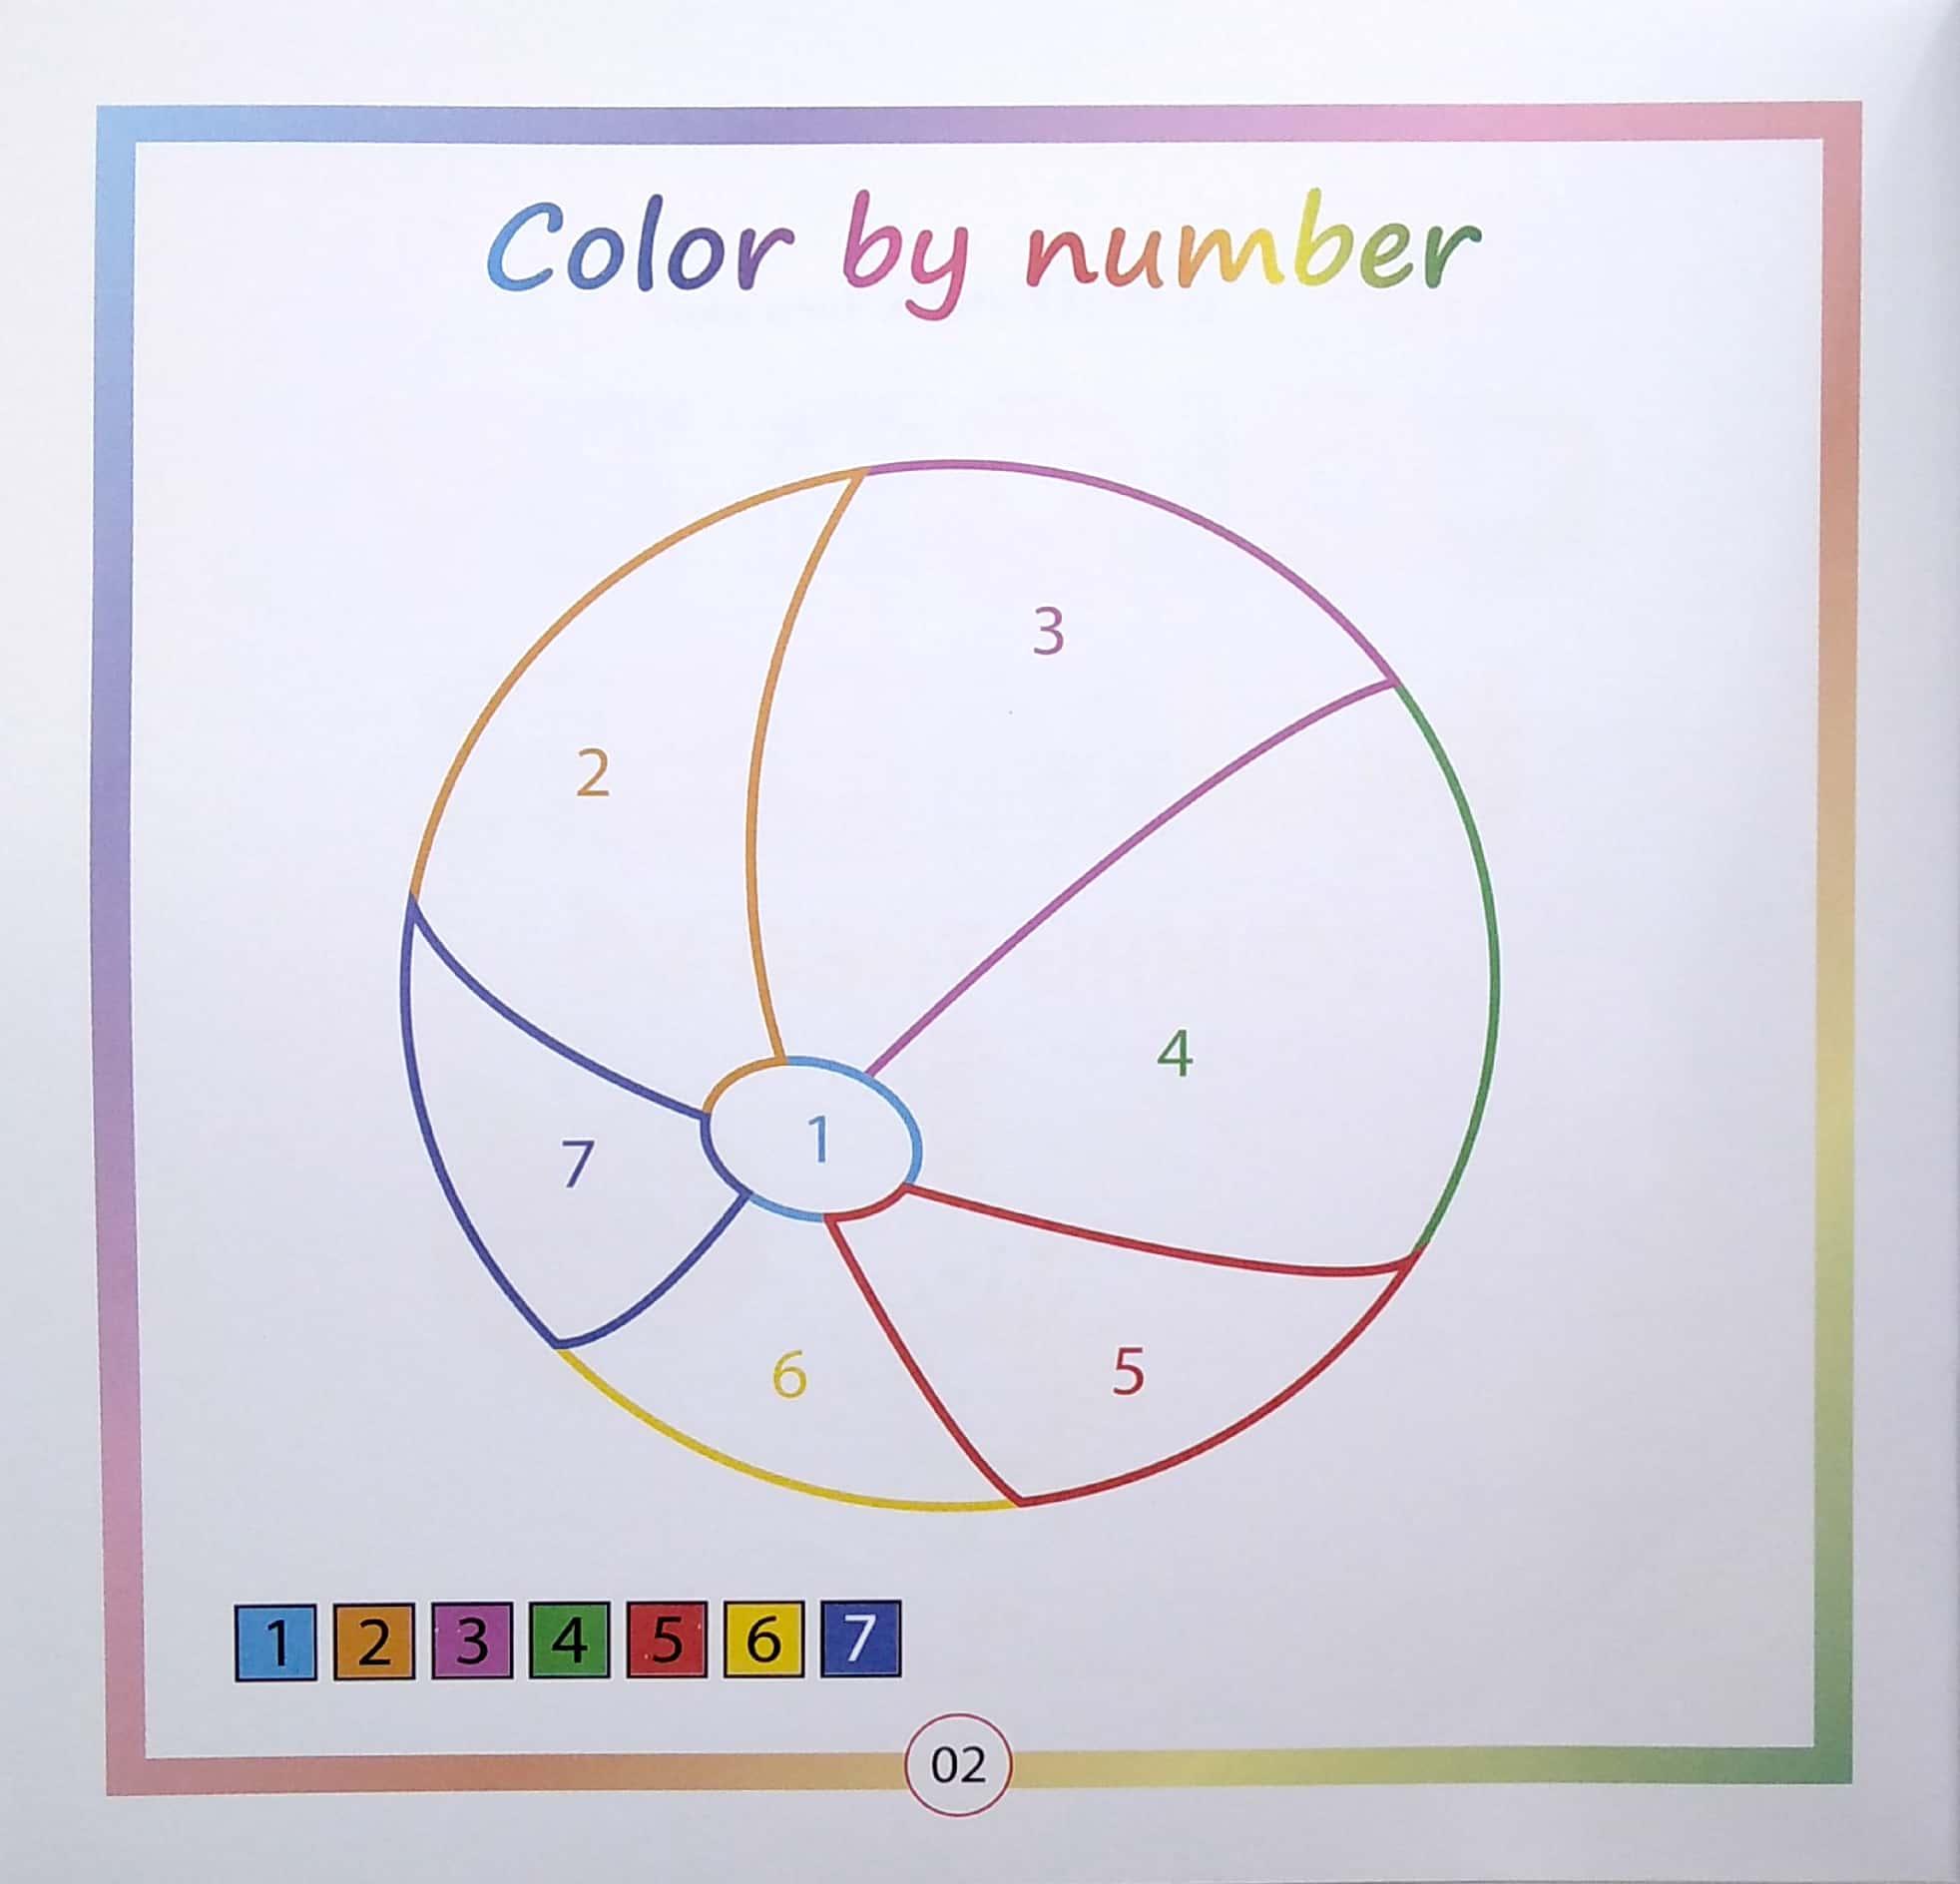 Color By Number - Tô Màu Theo Số -Tập 1